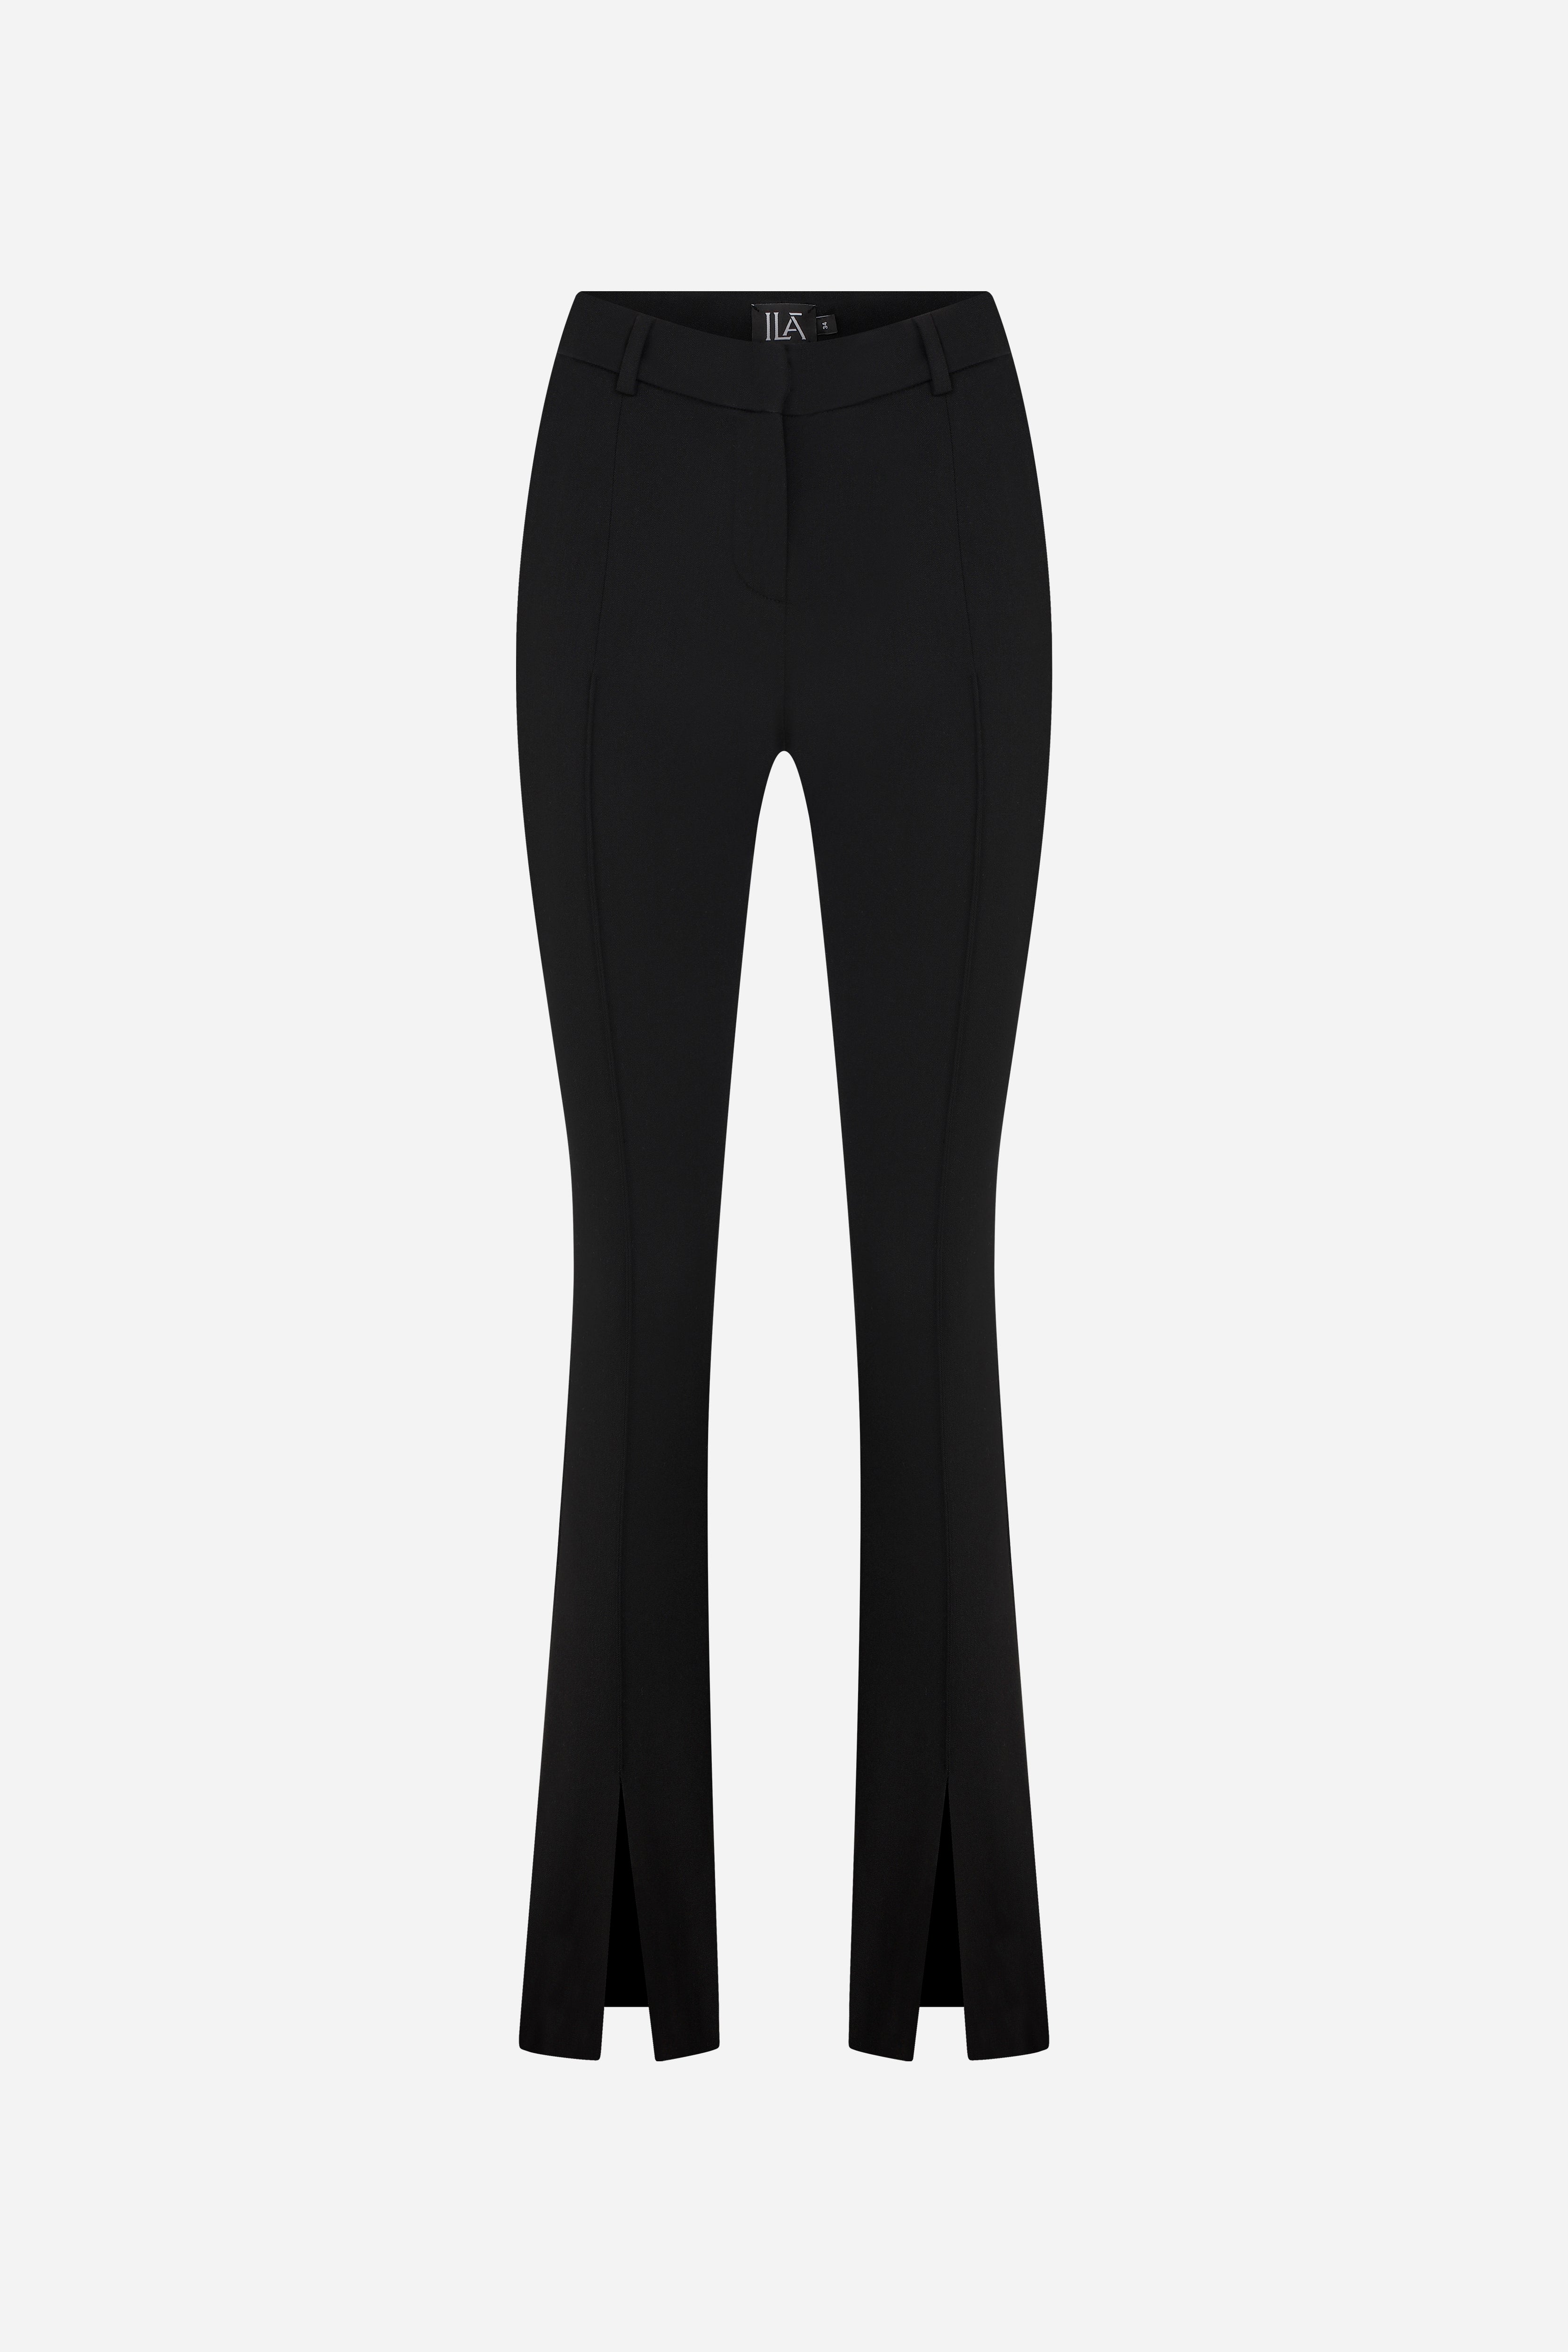 LINDA - LOW WAIST TROUSERS WITH FRONT SLIT